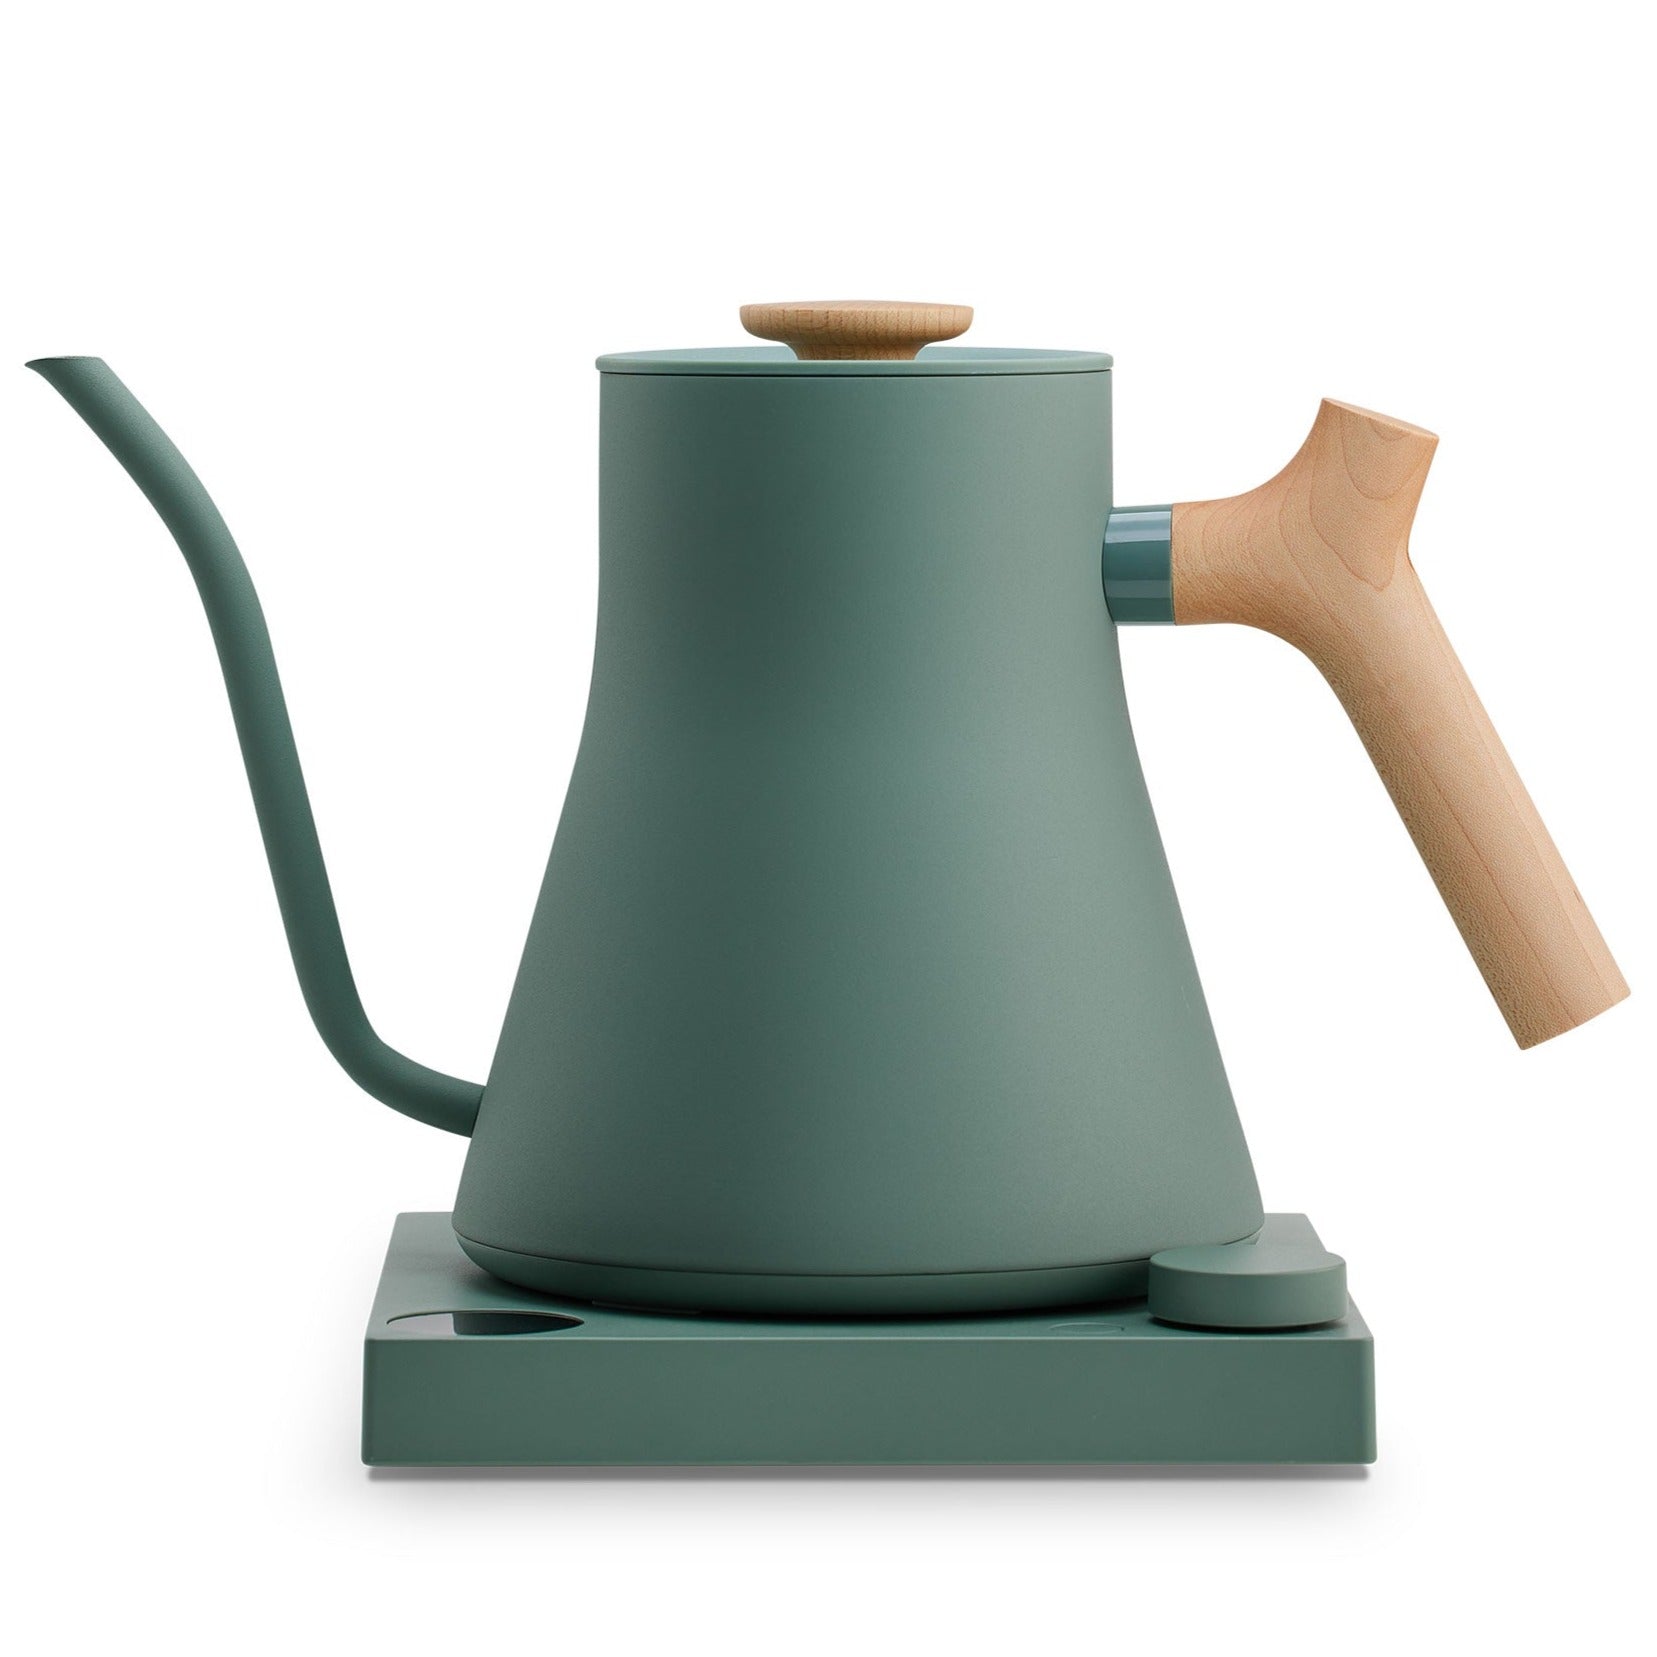 Stagg EKG Pro Electric KettleStagg EKG Pro Electric KettleCollective Coffee RoastersWe took what we do best, and made it better. Introducing Stagg EKG Pro, a game-changing evolution to our signature pour-over kettle. With fully customizable brew set